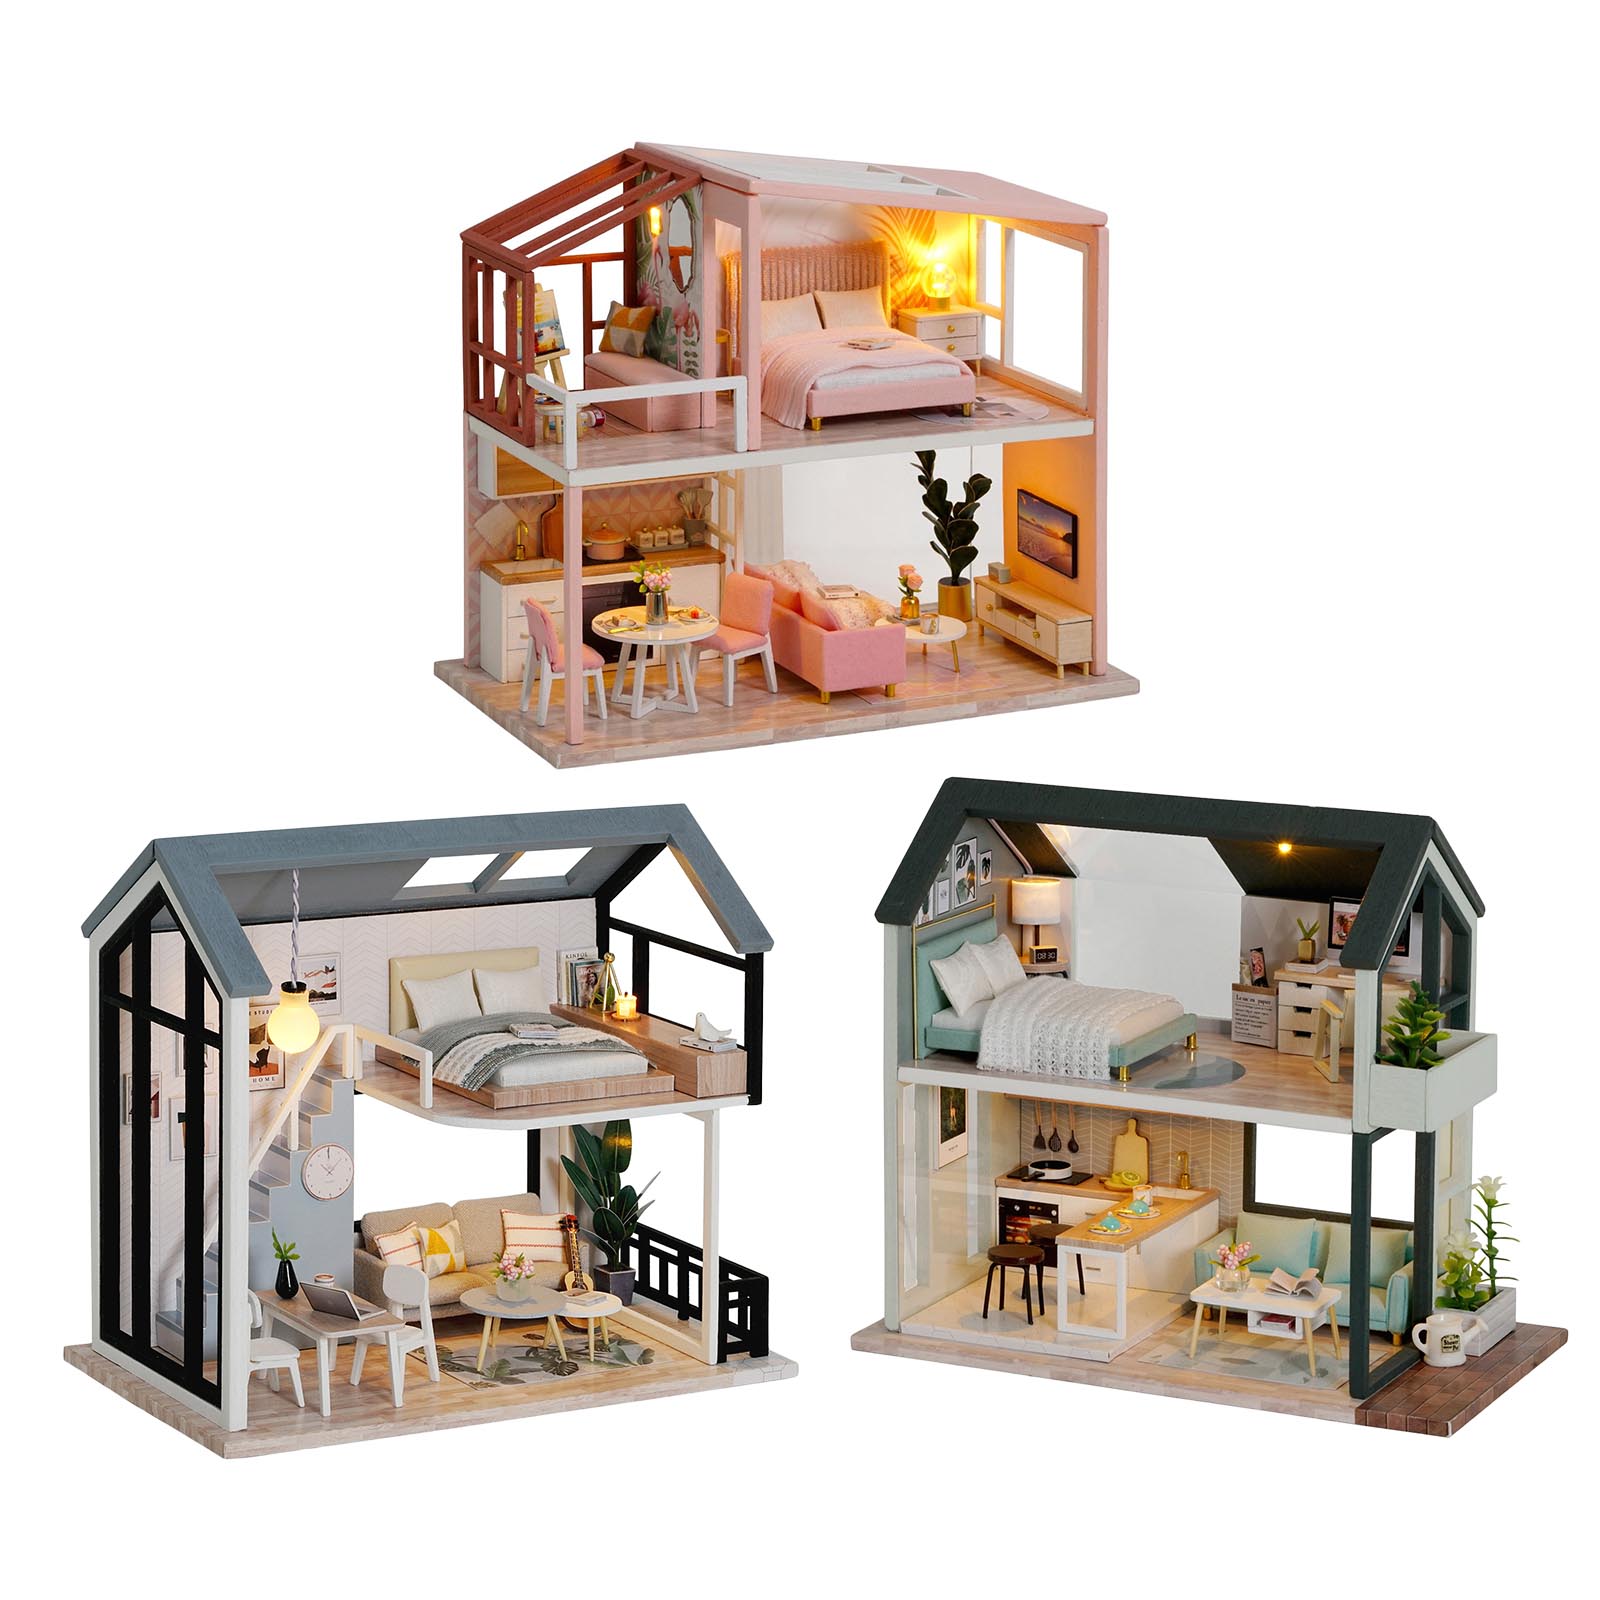 Wooden Dollhouse Miniature Furniture Doll House Kit Unfinished DIY Toy Gift 